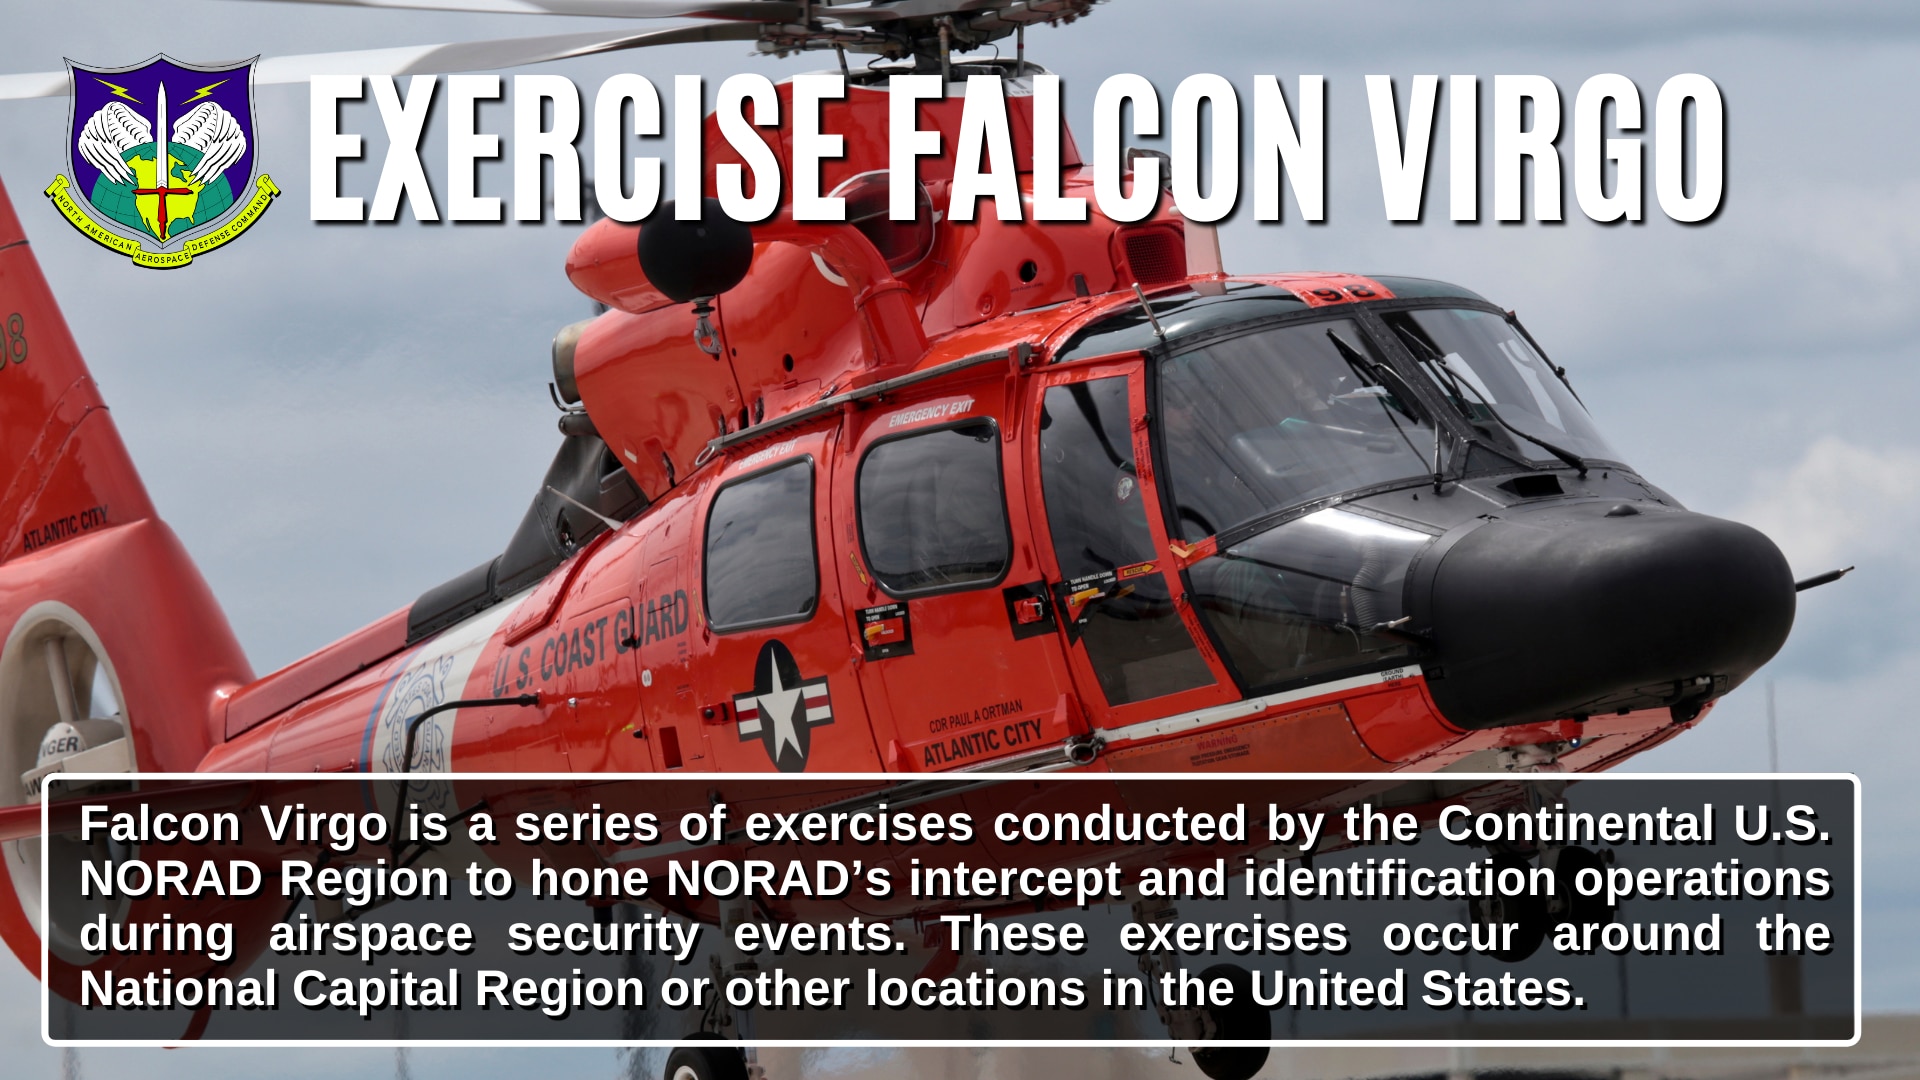 Falcon Virgo is a series of exercises conducted by the Continental U.S. NORAD Region to hone NORAD’s intercept and identification operations during airspace security events. These exercises occur around the National Capital Region or other locations in the United States.